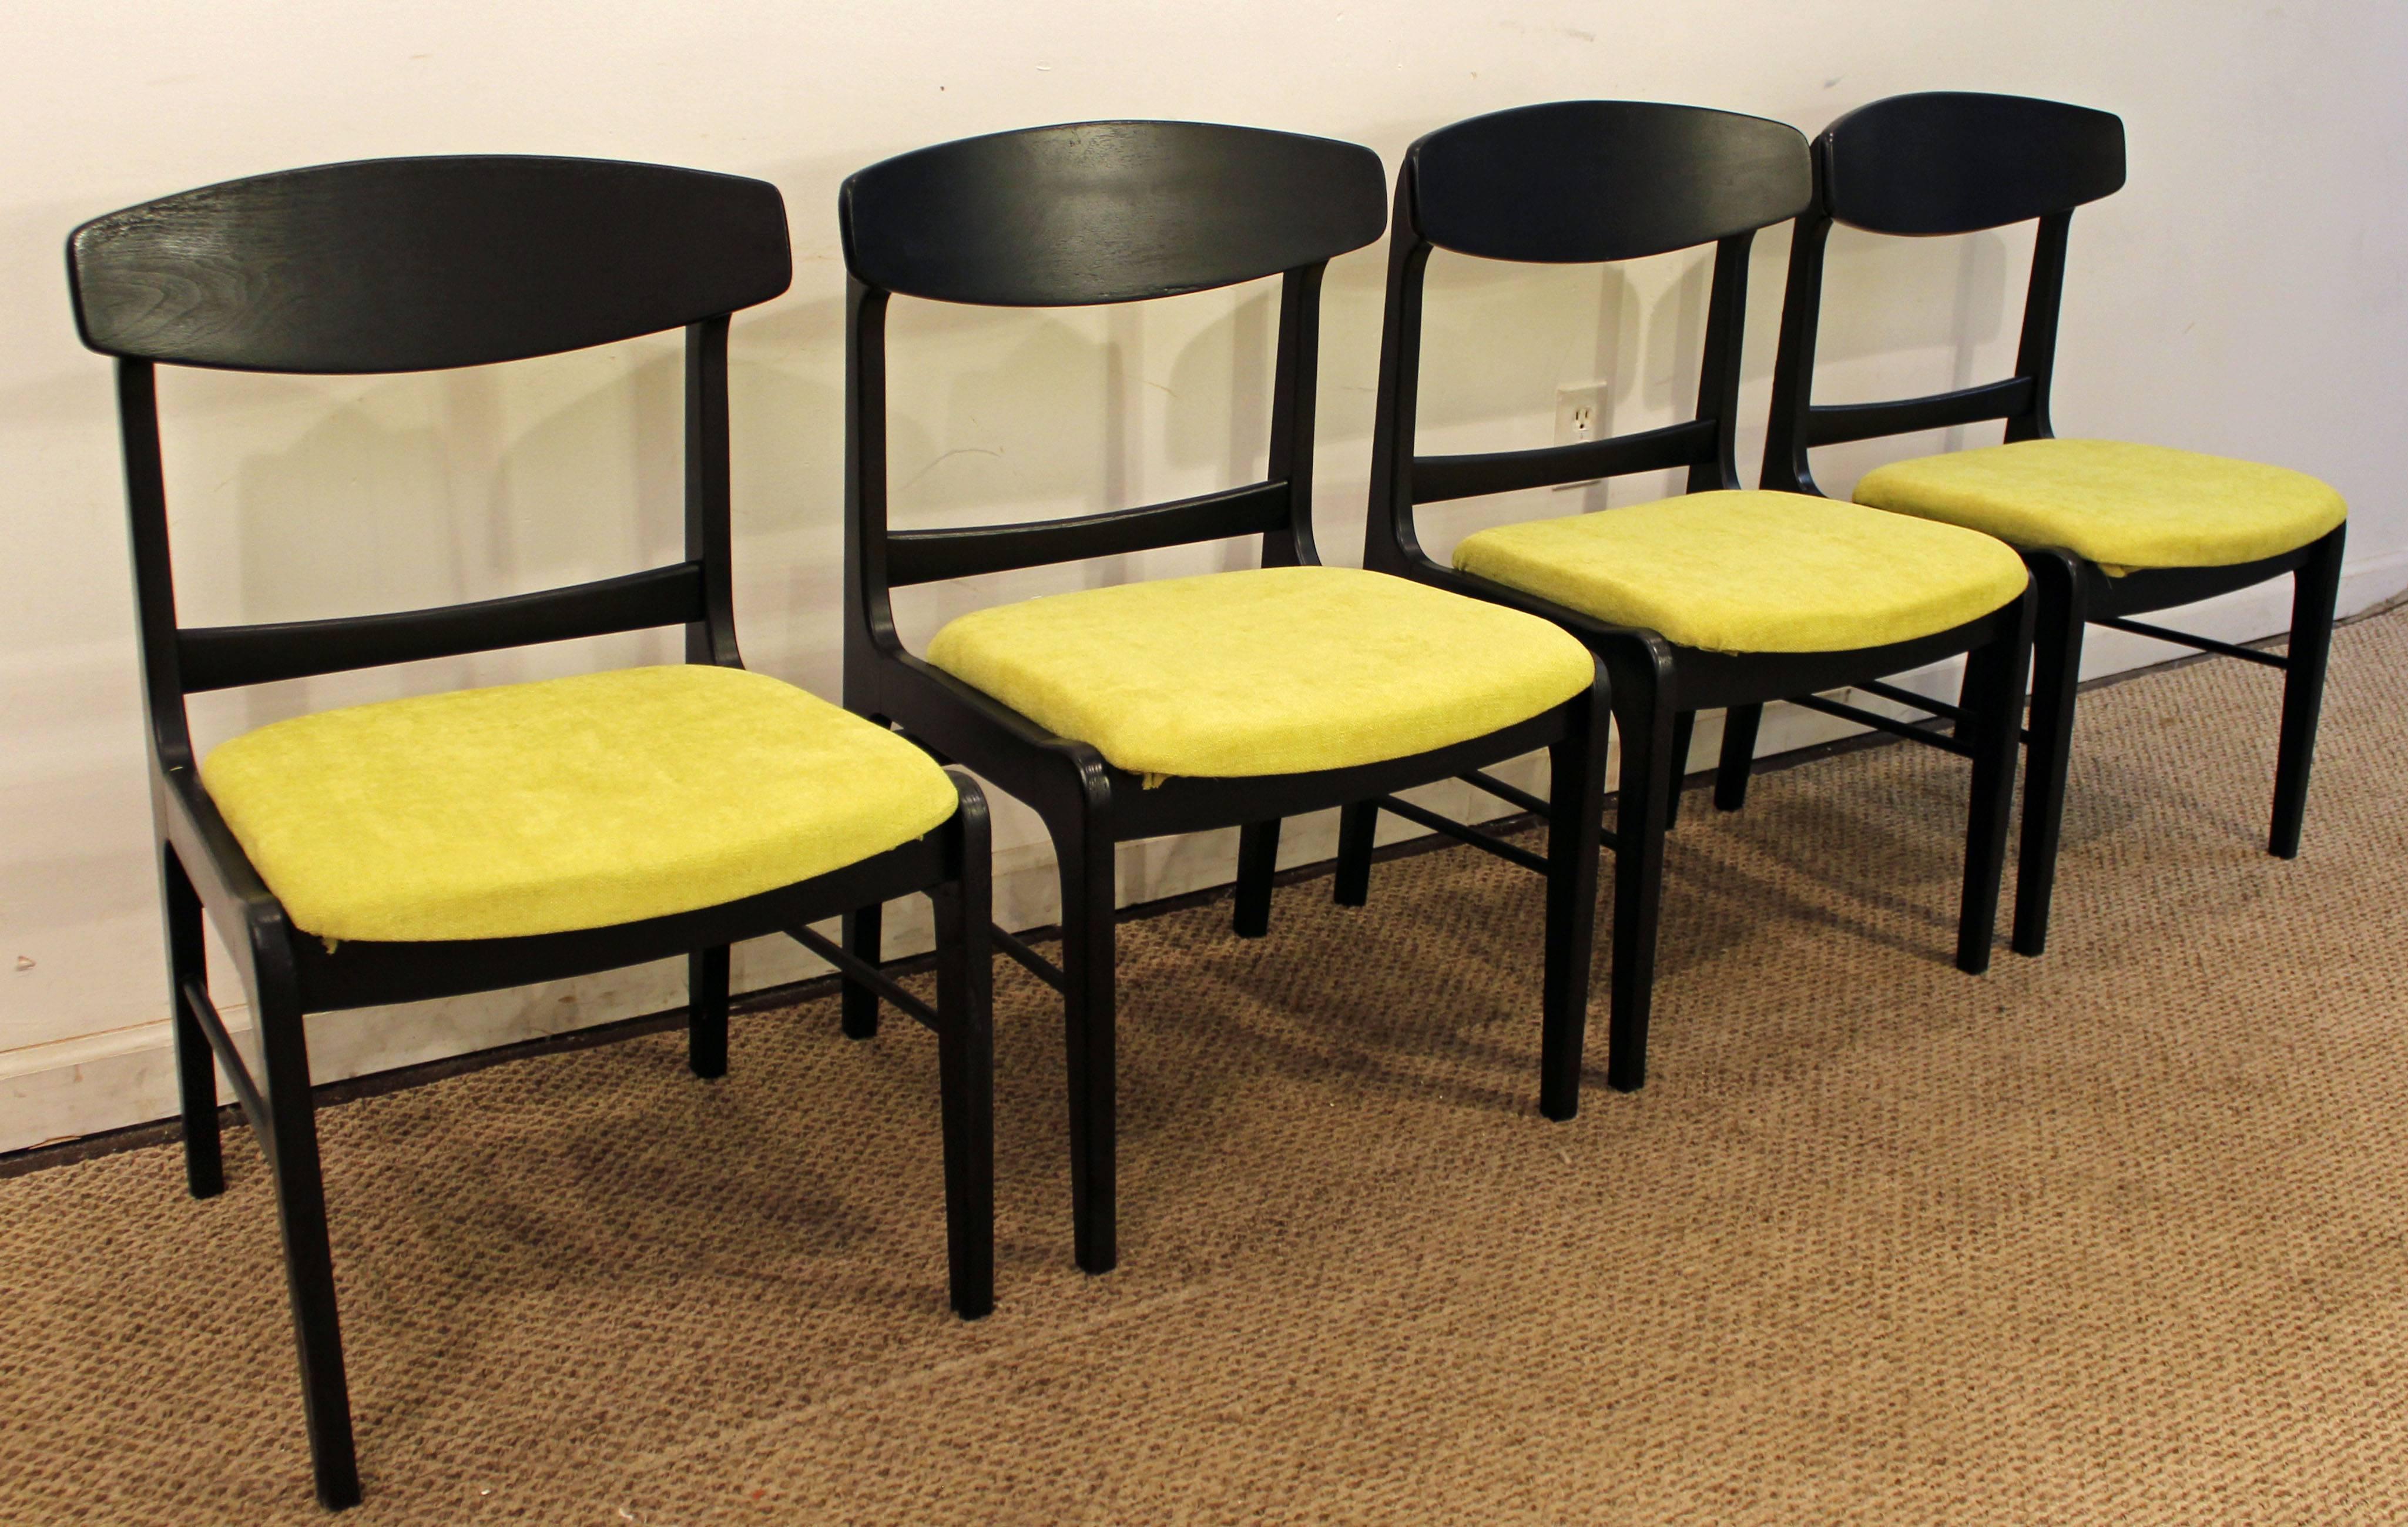 Offered is a very nice set of four Mid-Century Modern curved-back dining chairs. These chairs have been repainted black and reupholstered with new 'Citron' fabric.

Dimensions :
21